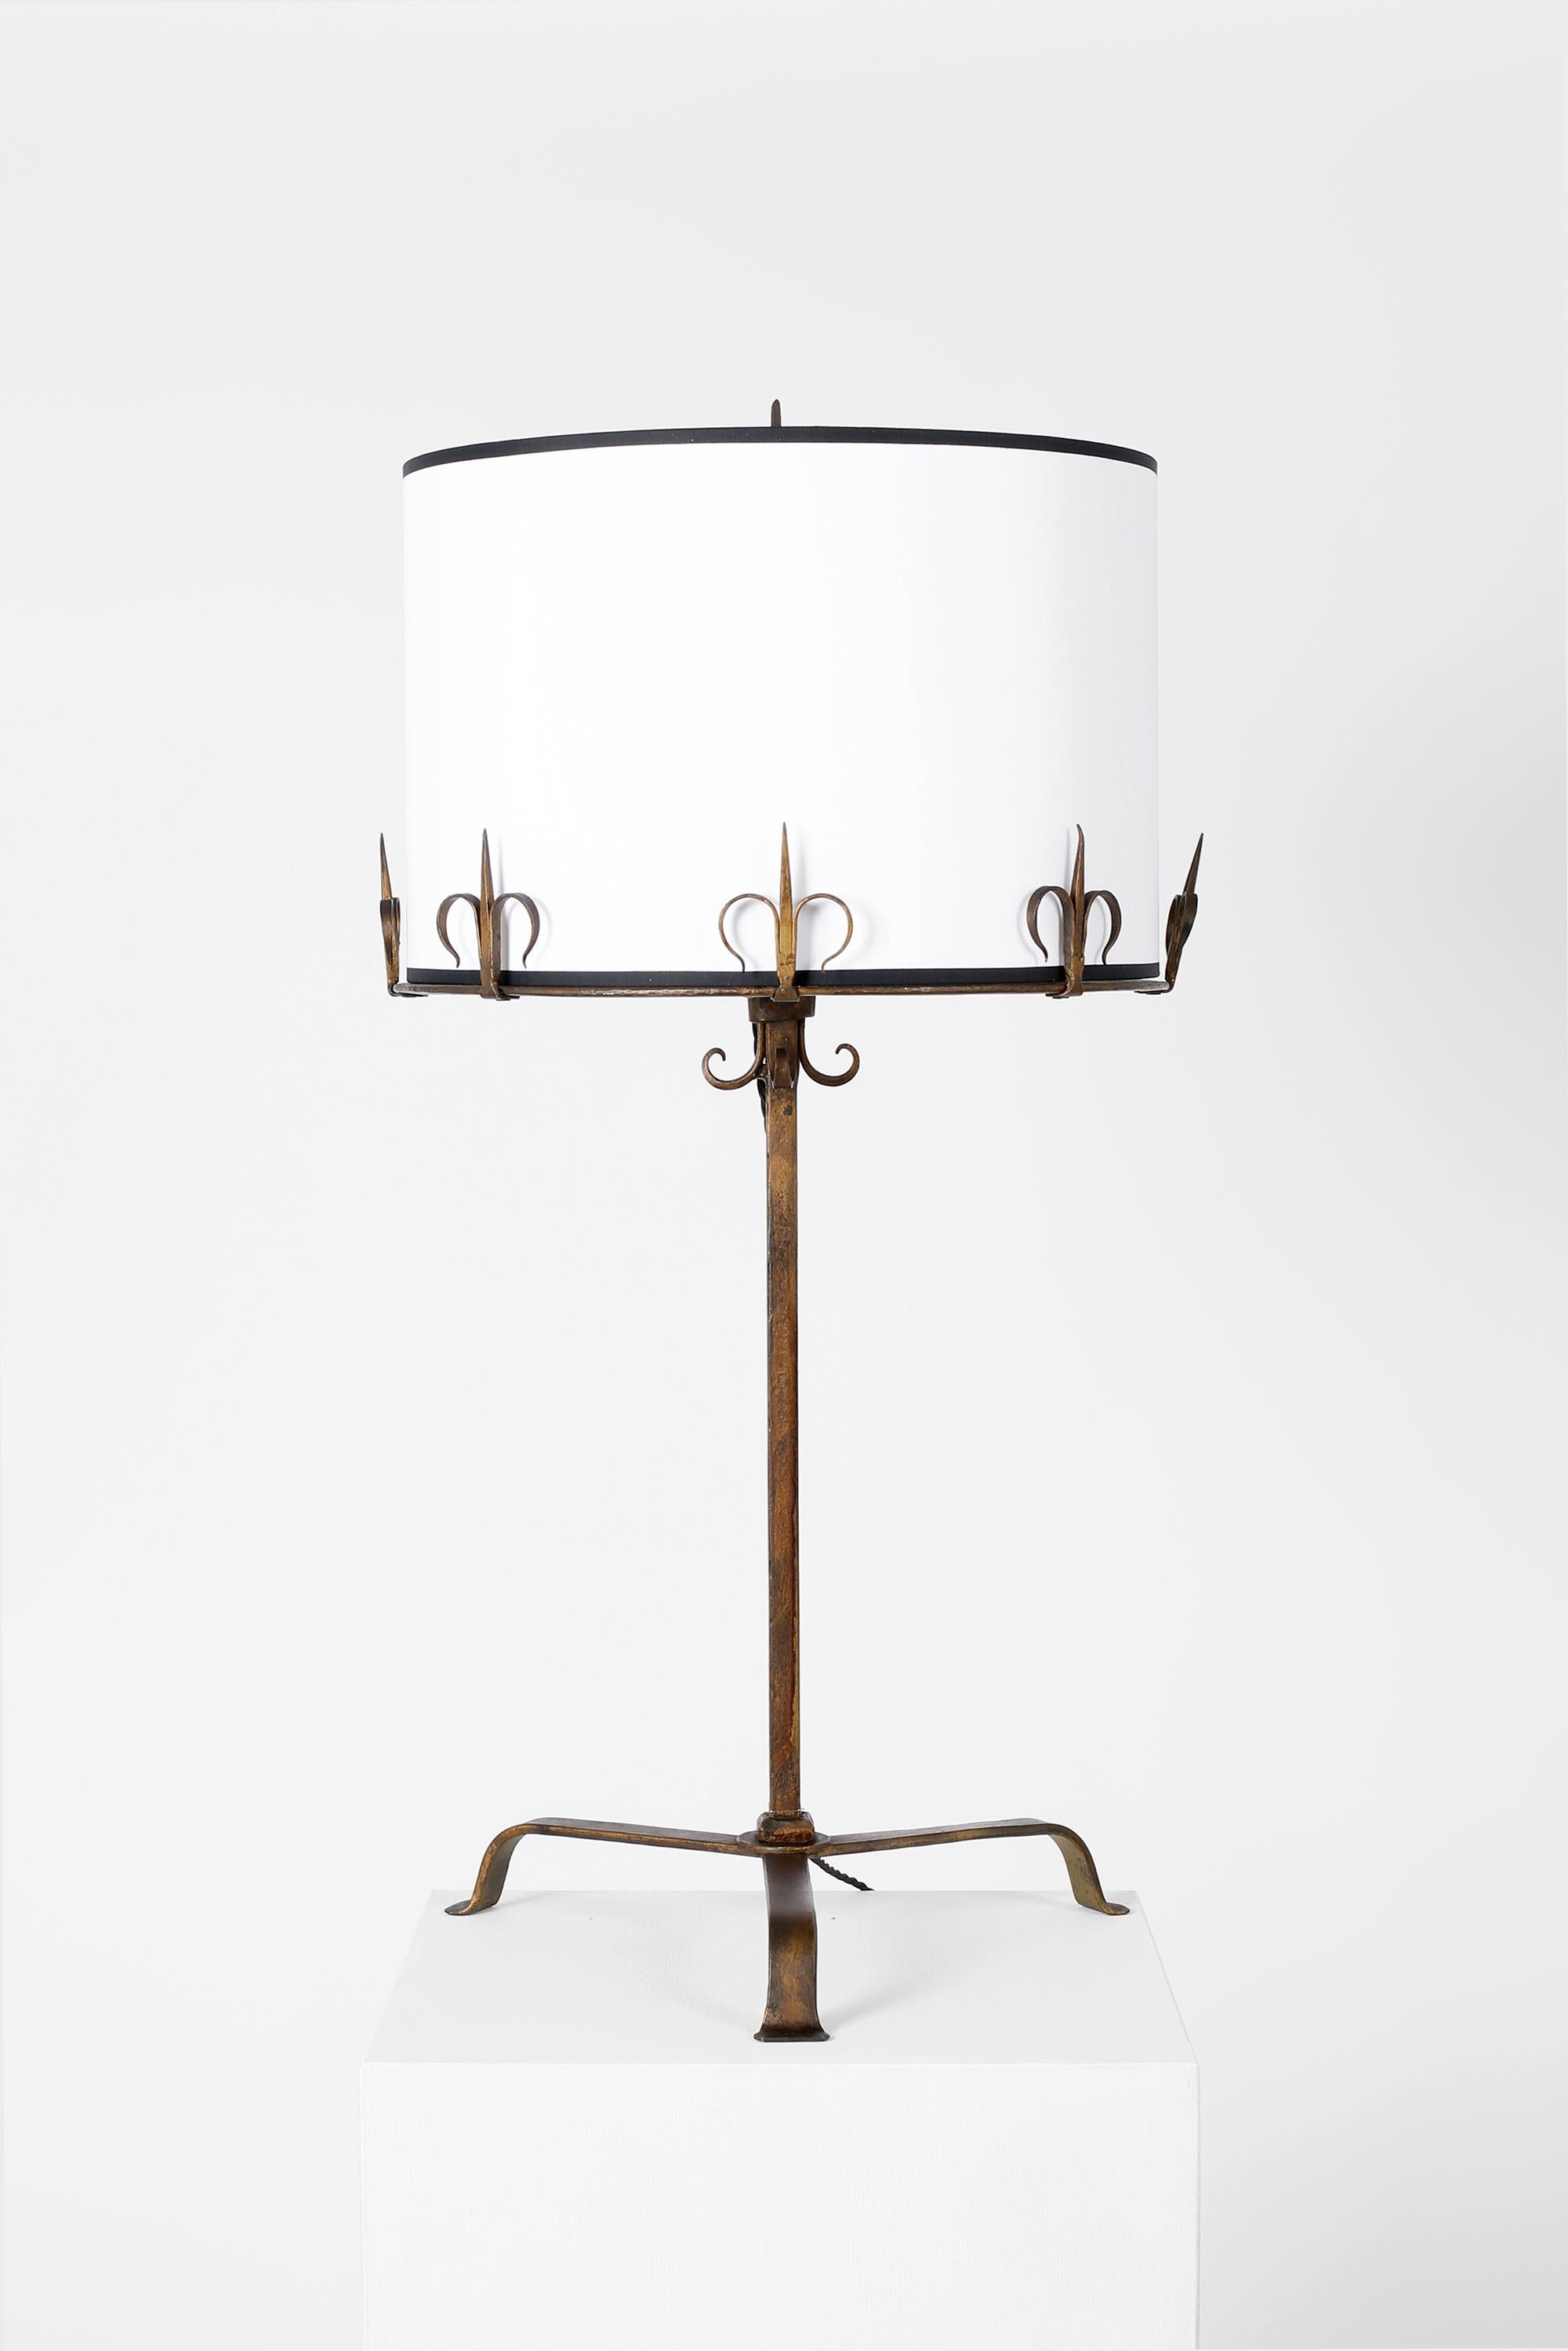 A run of seven gilt forged iron table lamps in the taste of Les Artisans de Marolles, with decorative fleur-de-lis detailing, three point bases and new white cotton shades with black trim. From a hotel in Andalusia, southern Spain, c. 1960.